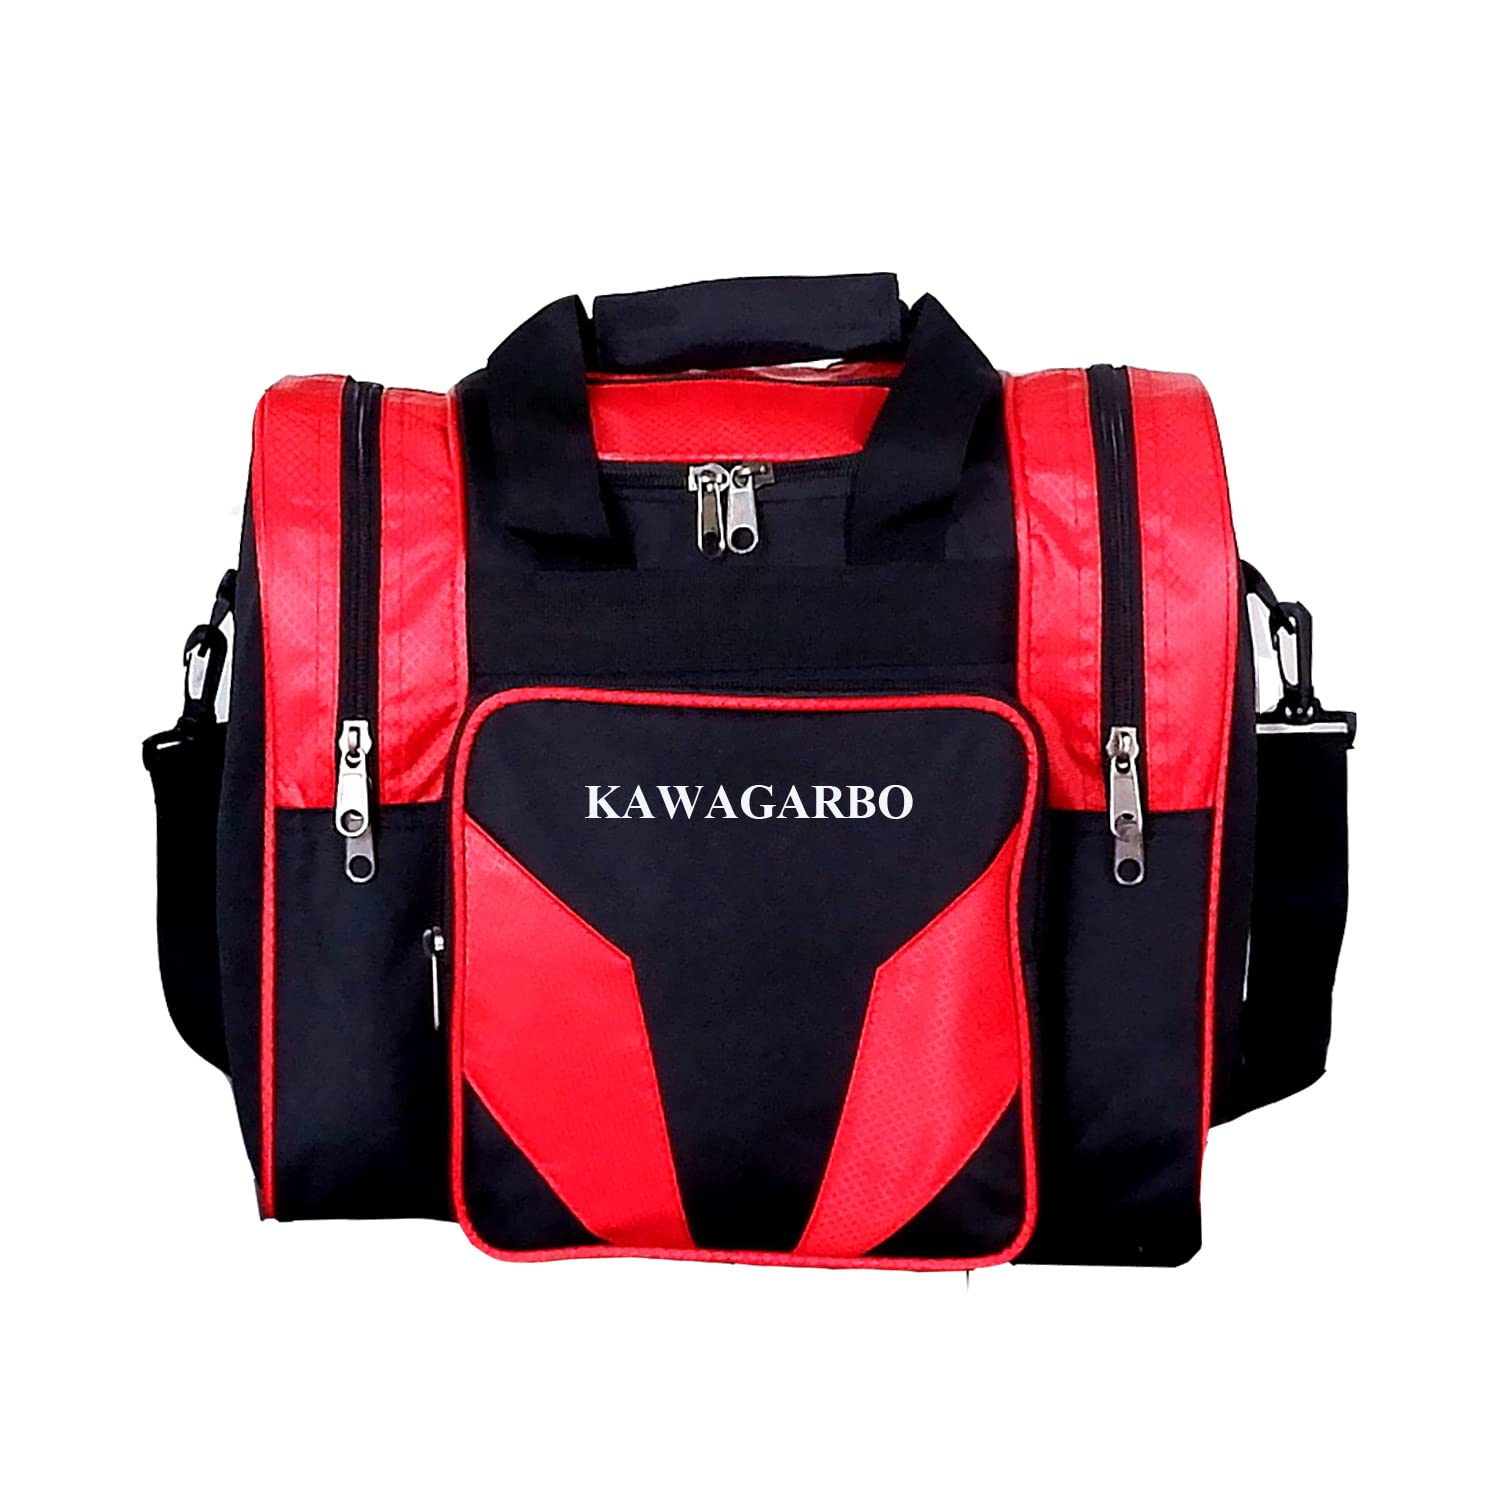 Kawagarbo Bowling Bag For Single Ball - Single Ball Tote Bag With Padded Ball Holder - Fits A Single Pair Of Bowling Shoes Up To